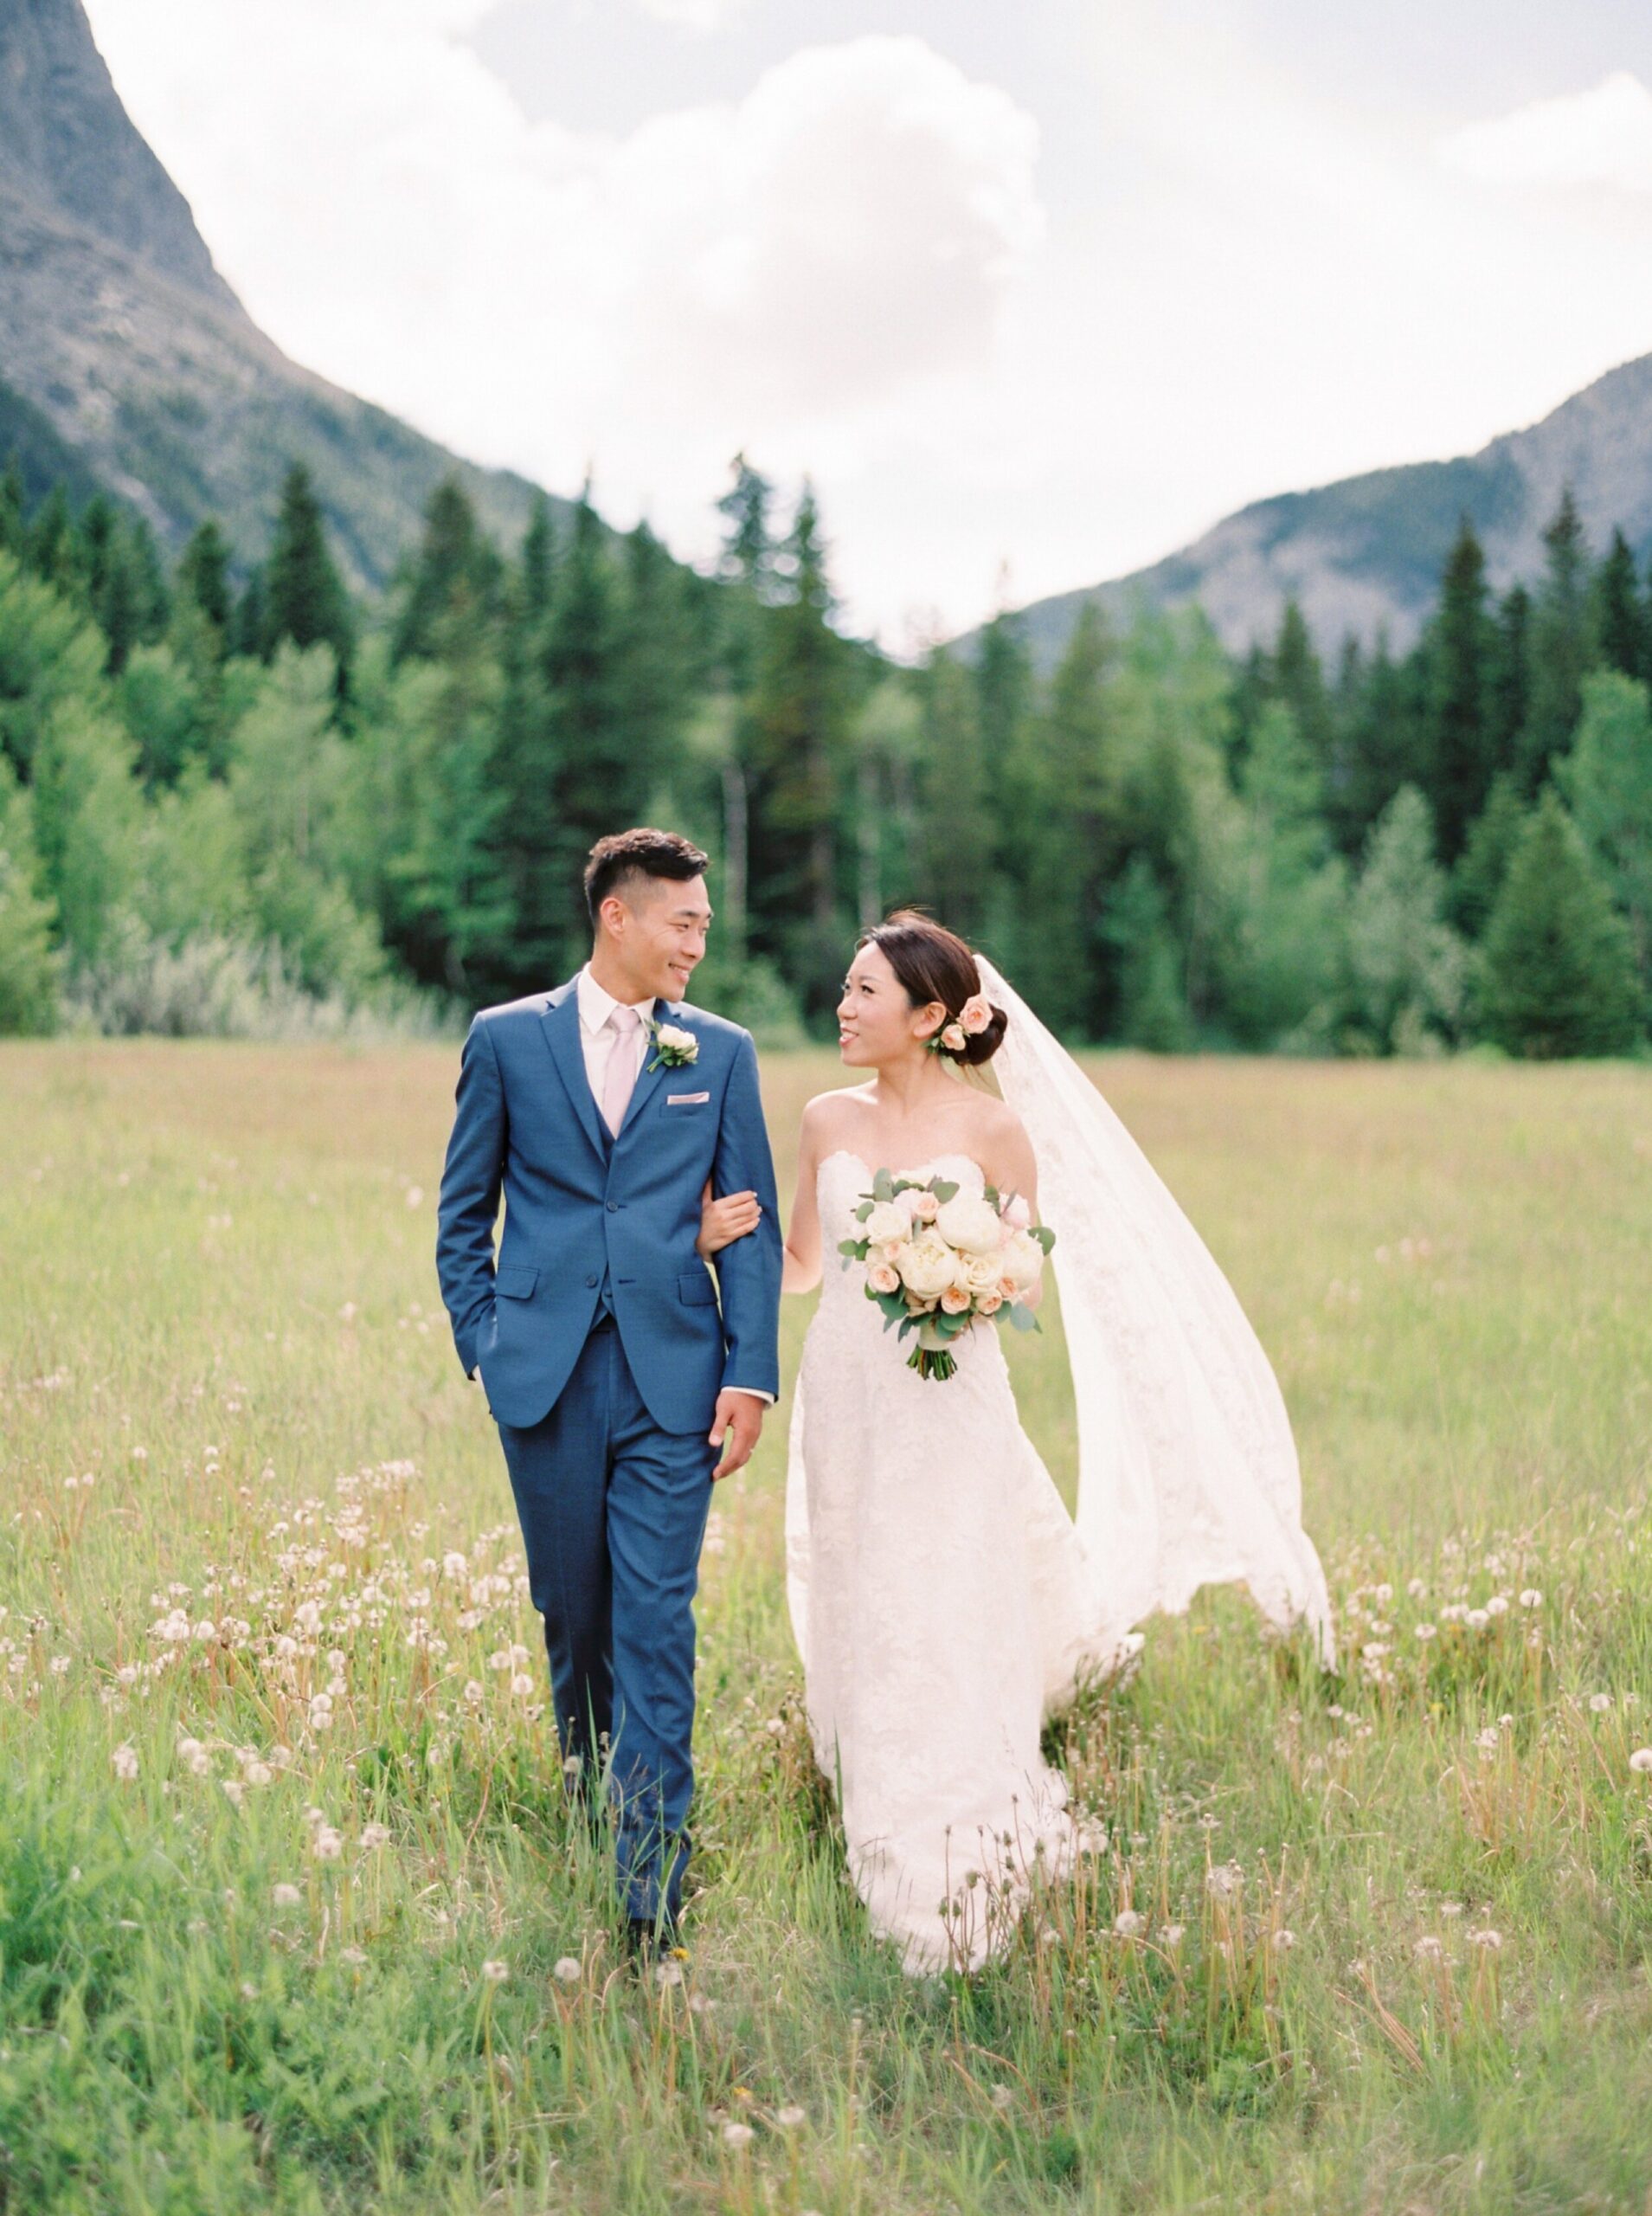  bride and groom portraits | pose ideas in the mountains | silvertip canmore wedding photographers 